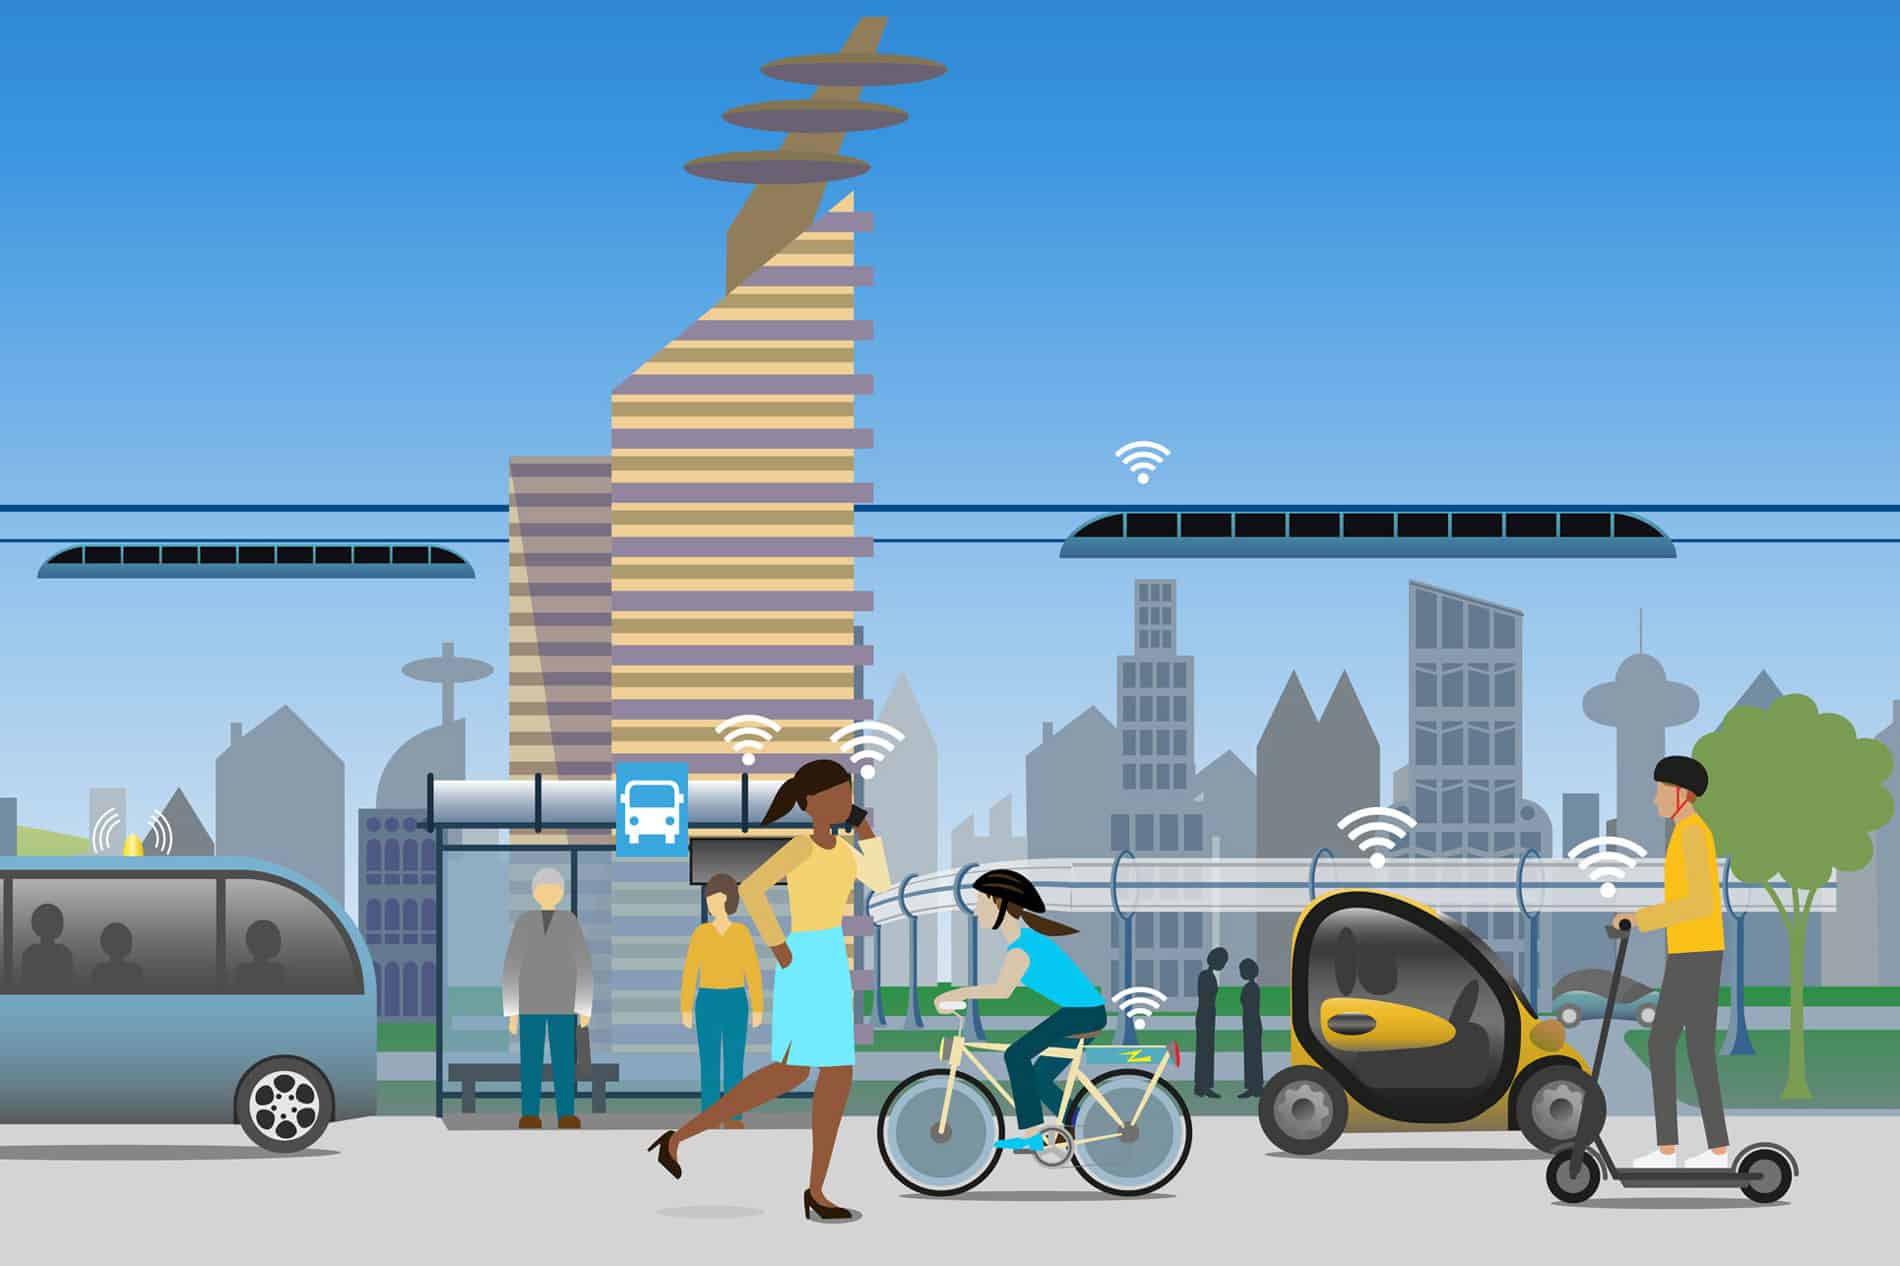 illustration on people using different modes of transportation in a futuristic setting